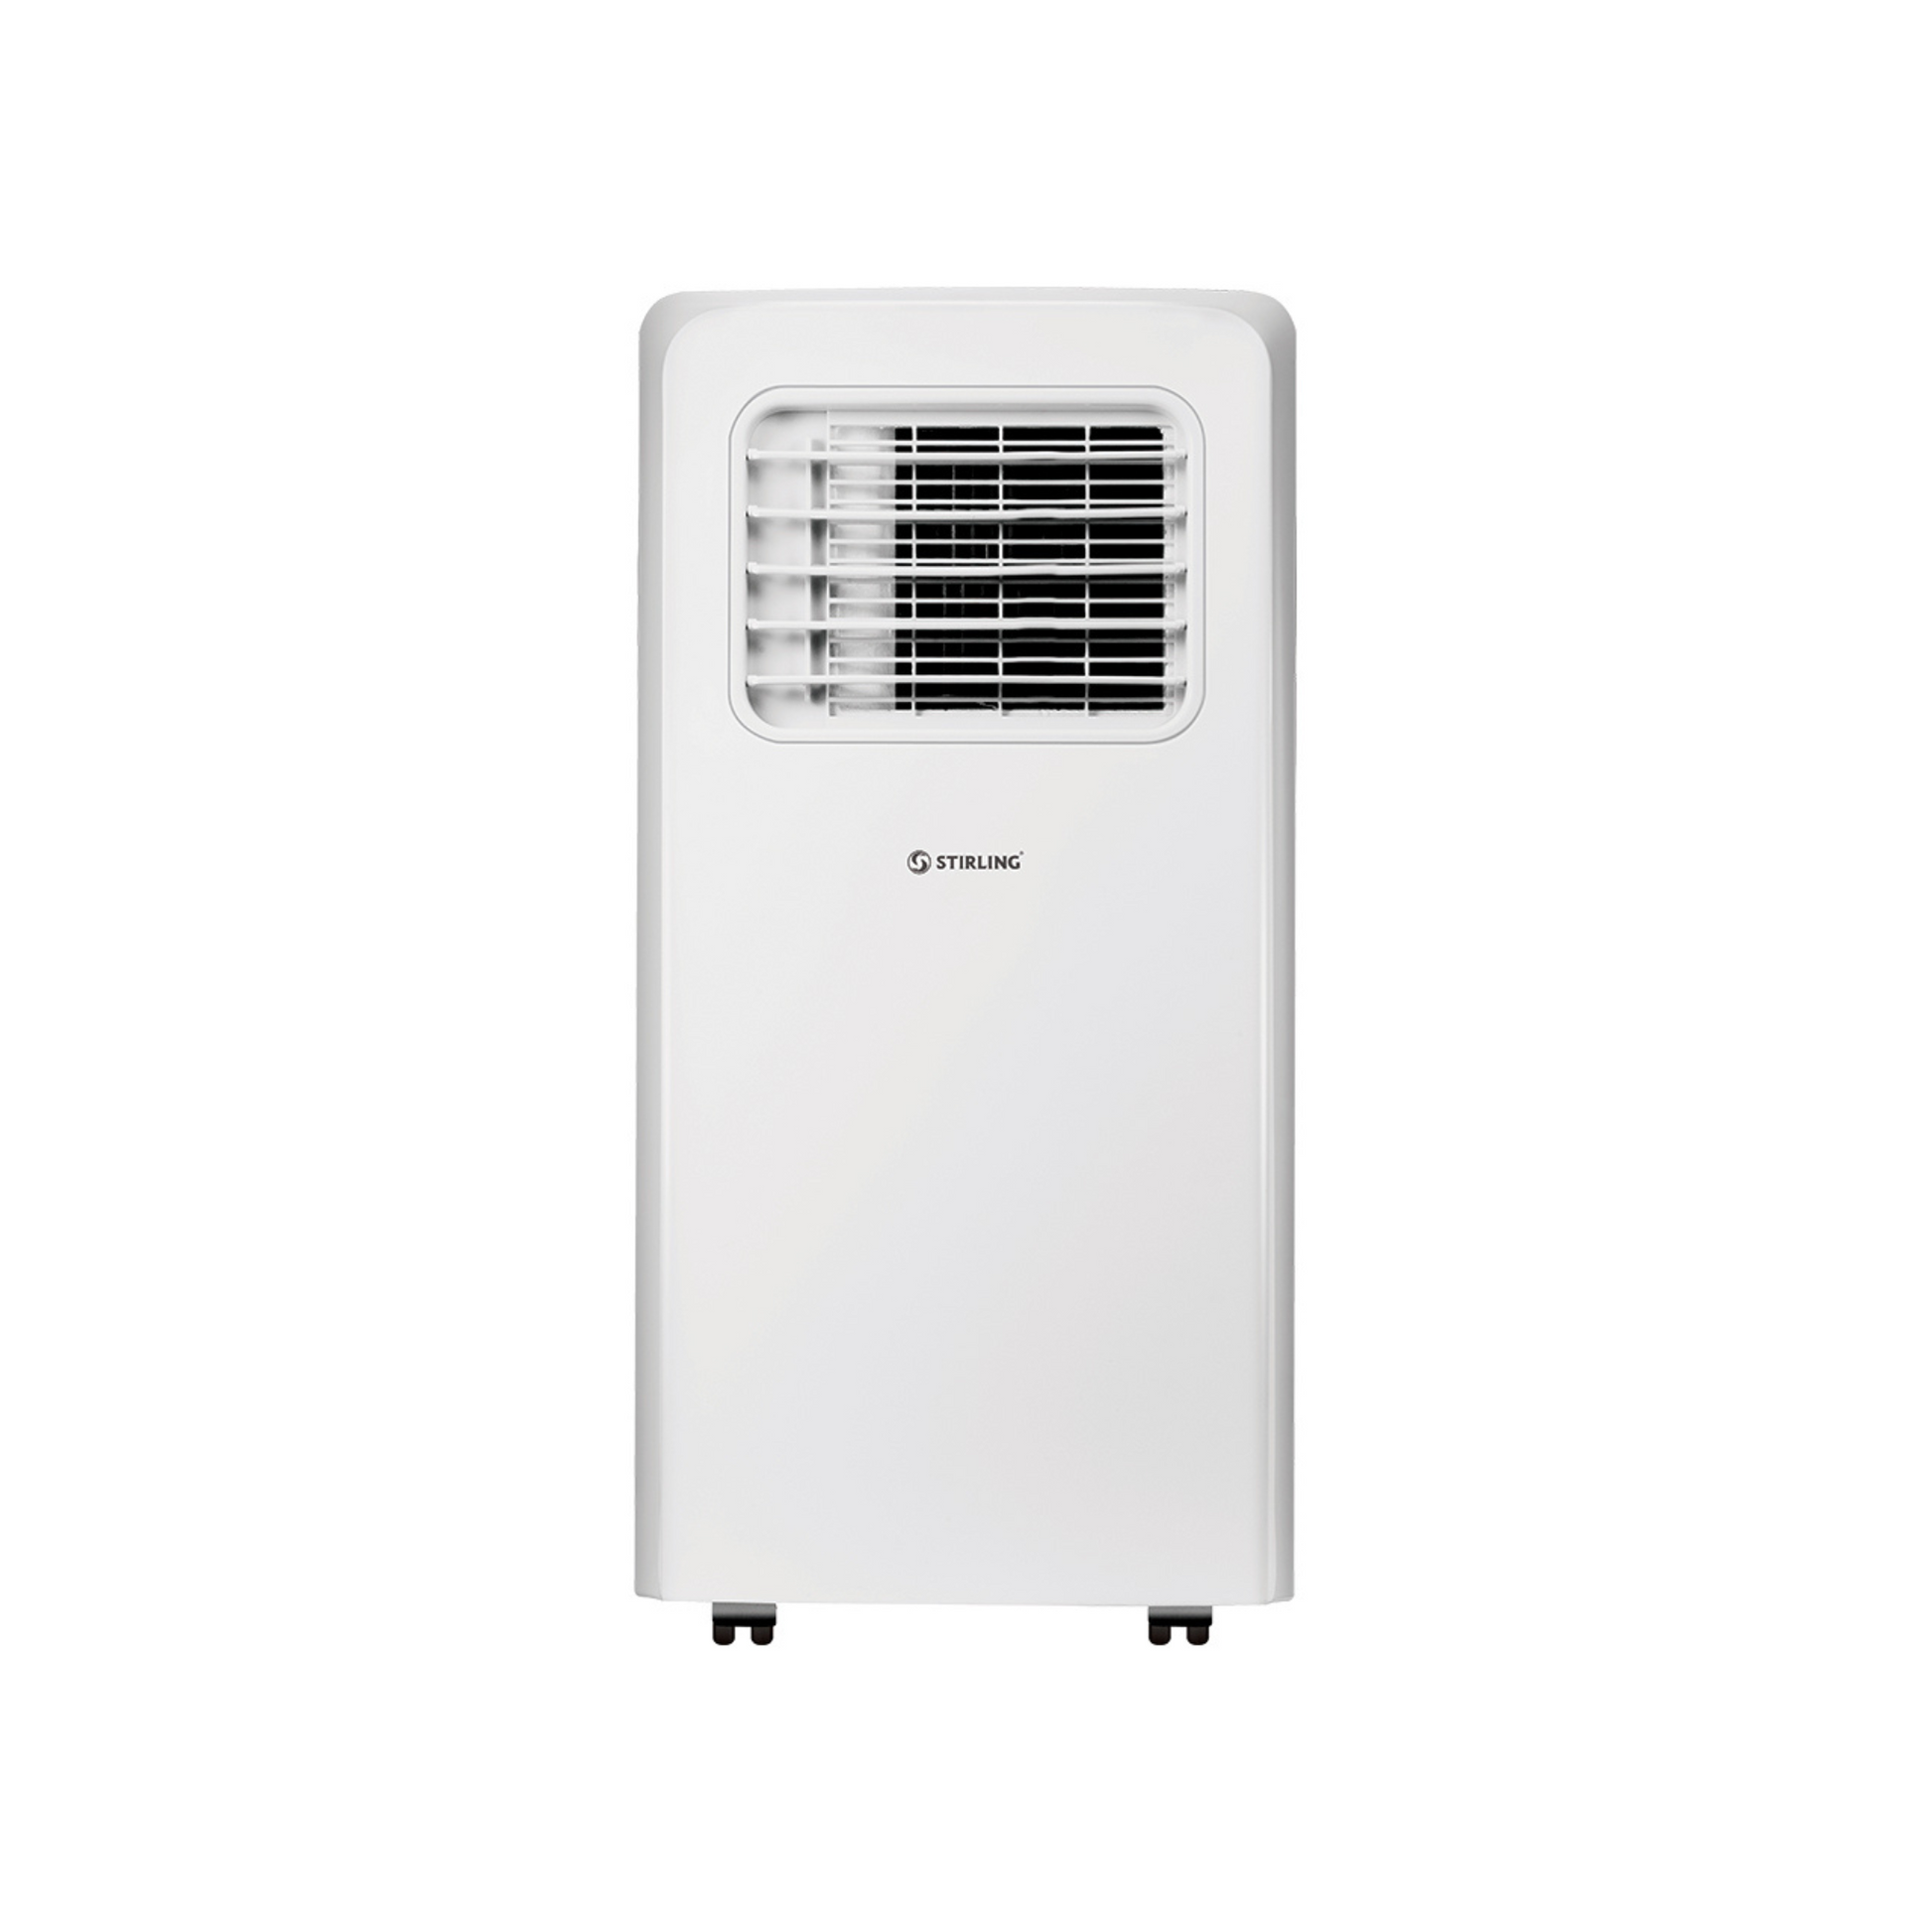 Stirling 1.9KW Portable WiFi Air Conditioner, PA19W